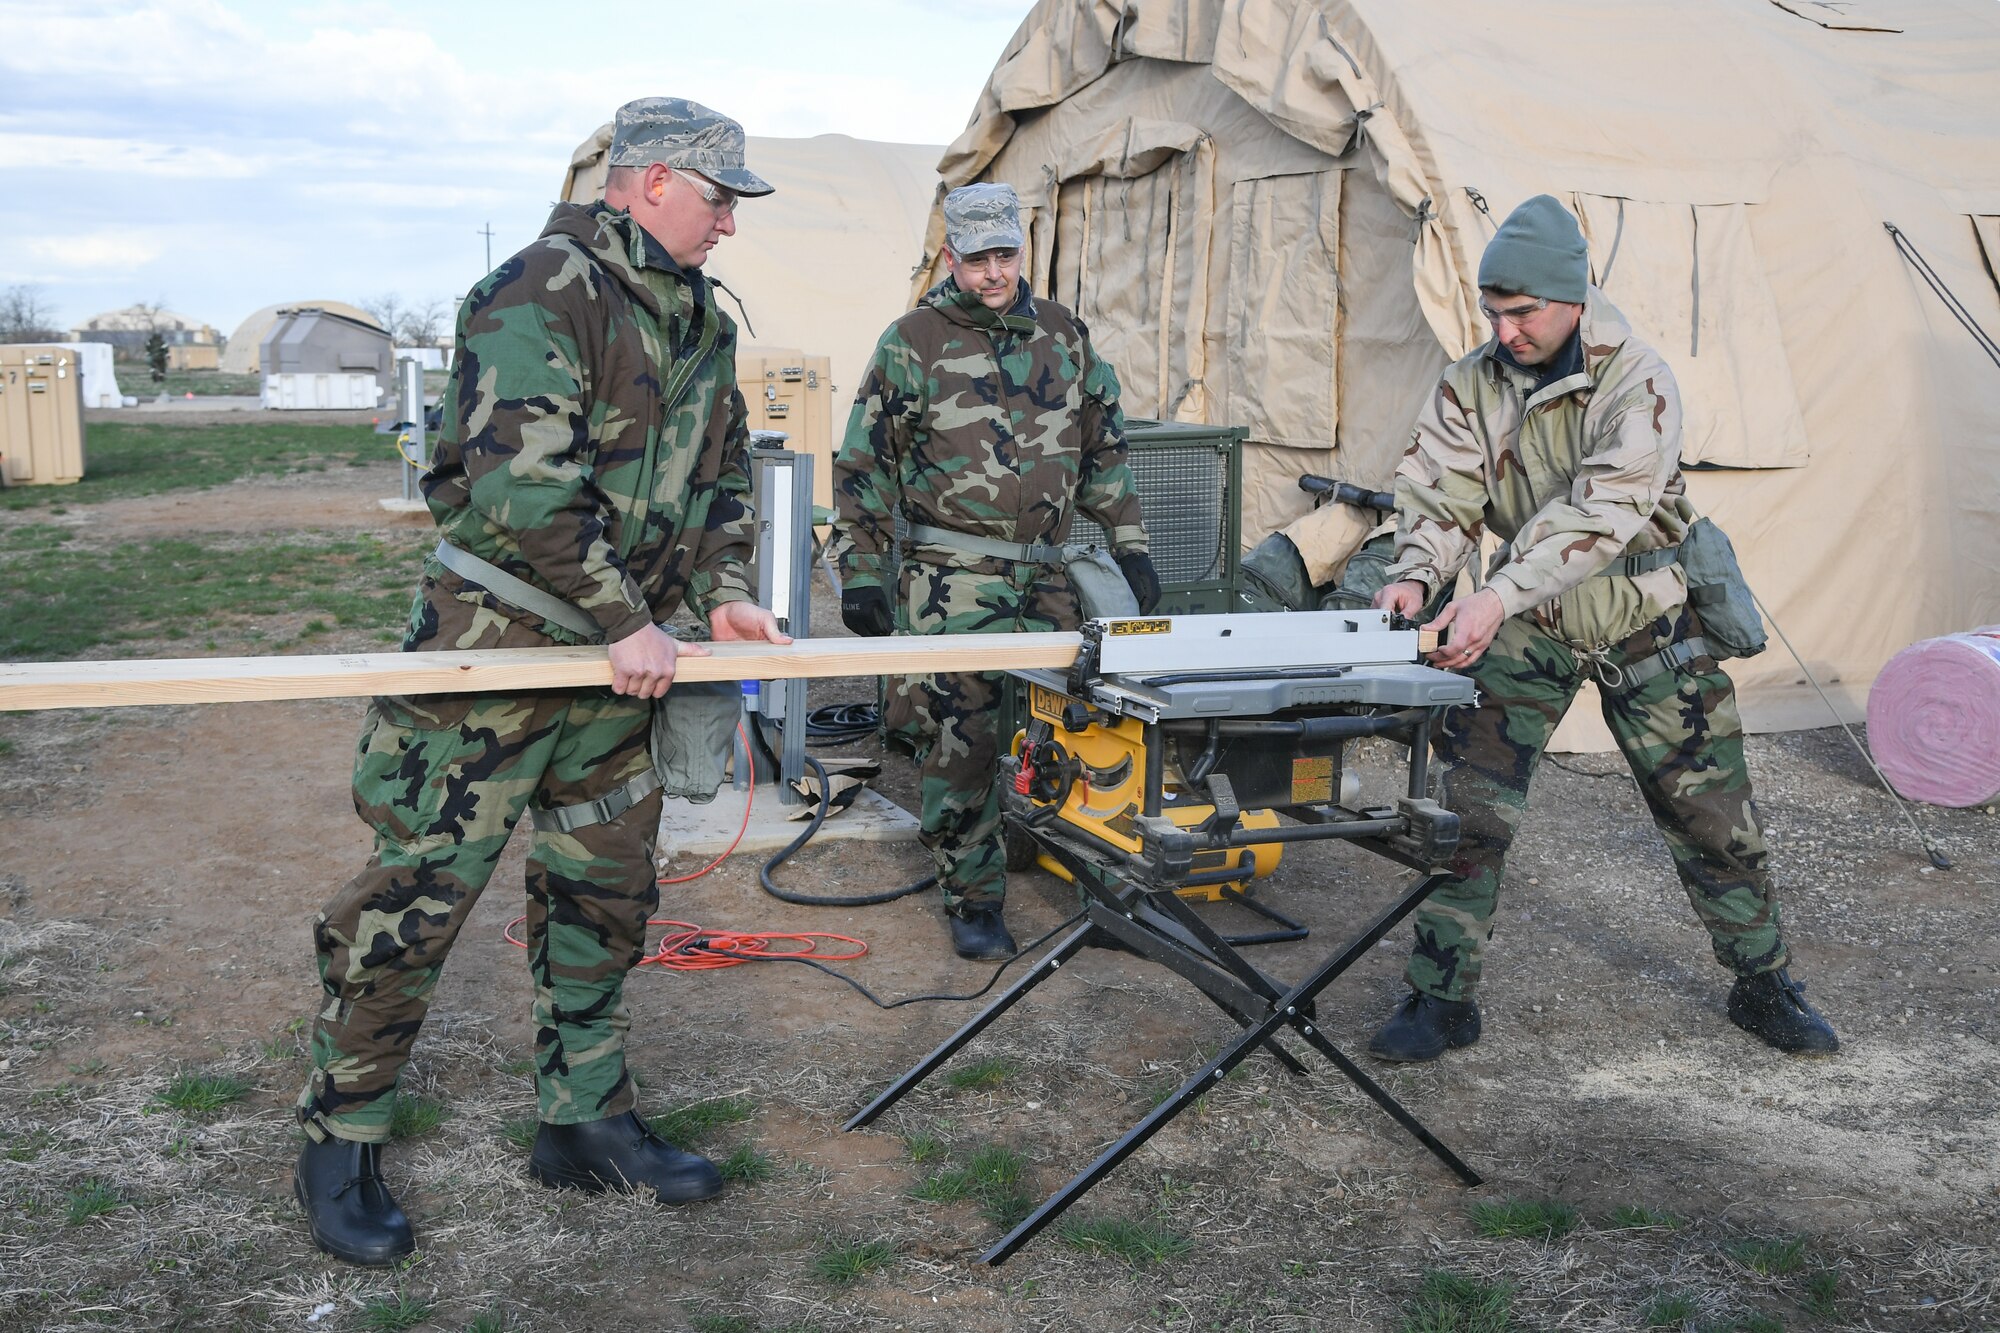 Tech. Sgt. Joshua Jacobson, Tech. Sgt. Timothy Lynch, Staff Sgt. Zachariah Pinkston prepare to build a shed for a firefighting exercise